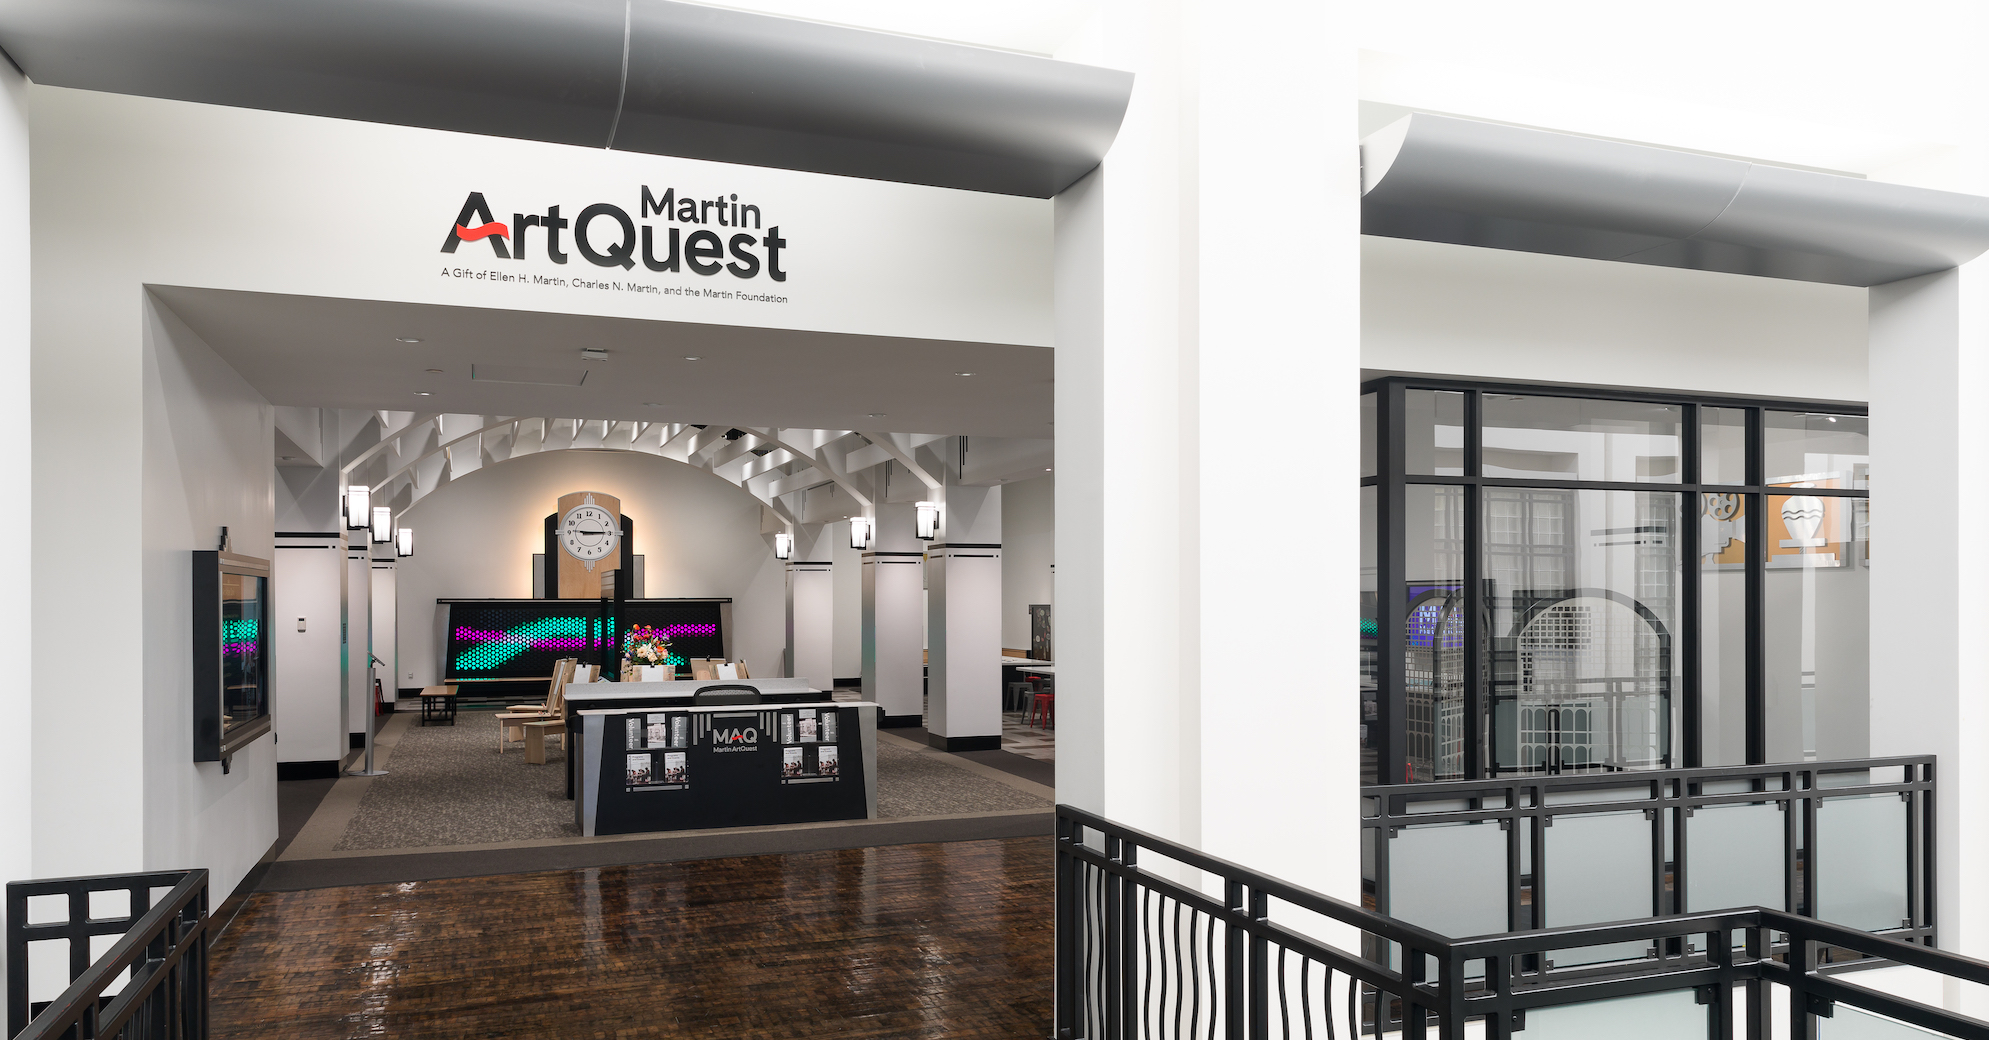 The entrance to Martin ArtQuest before opening for the day. The logo is seen above the door. A desk greets patrons at the entry. A large backlit clock is on the back wall. 